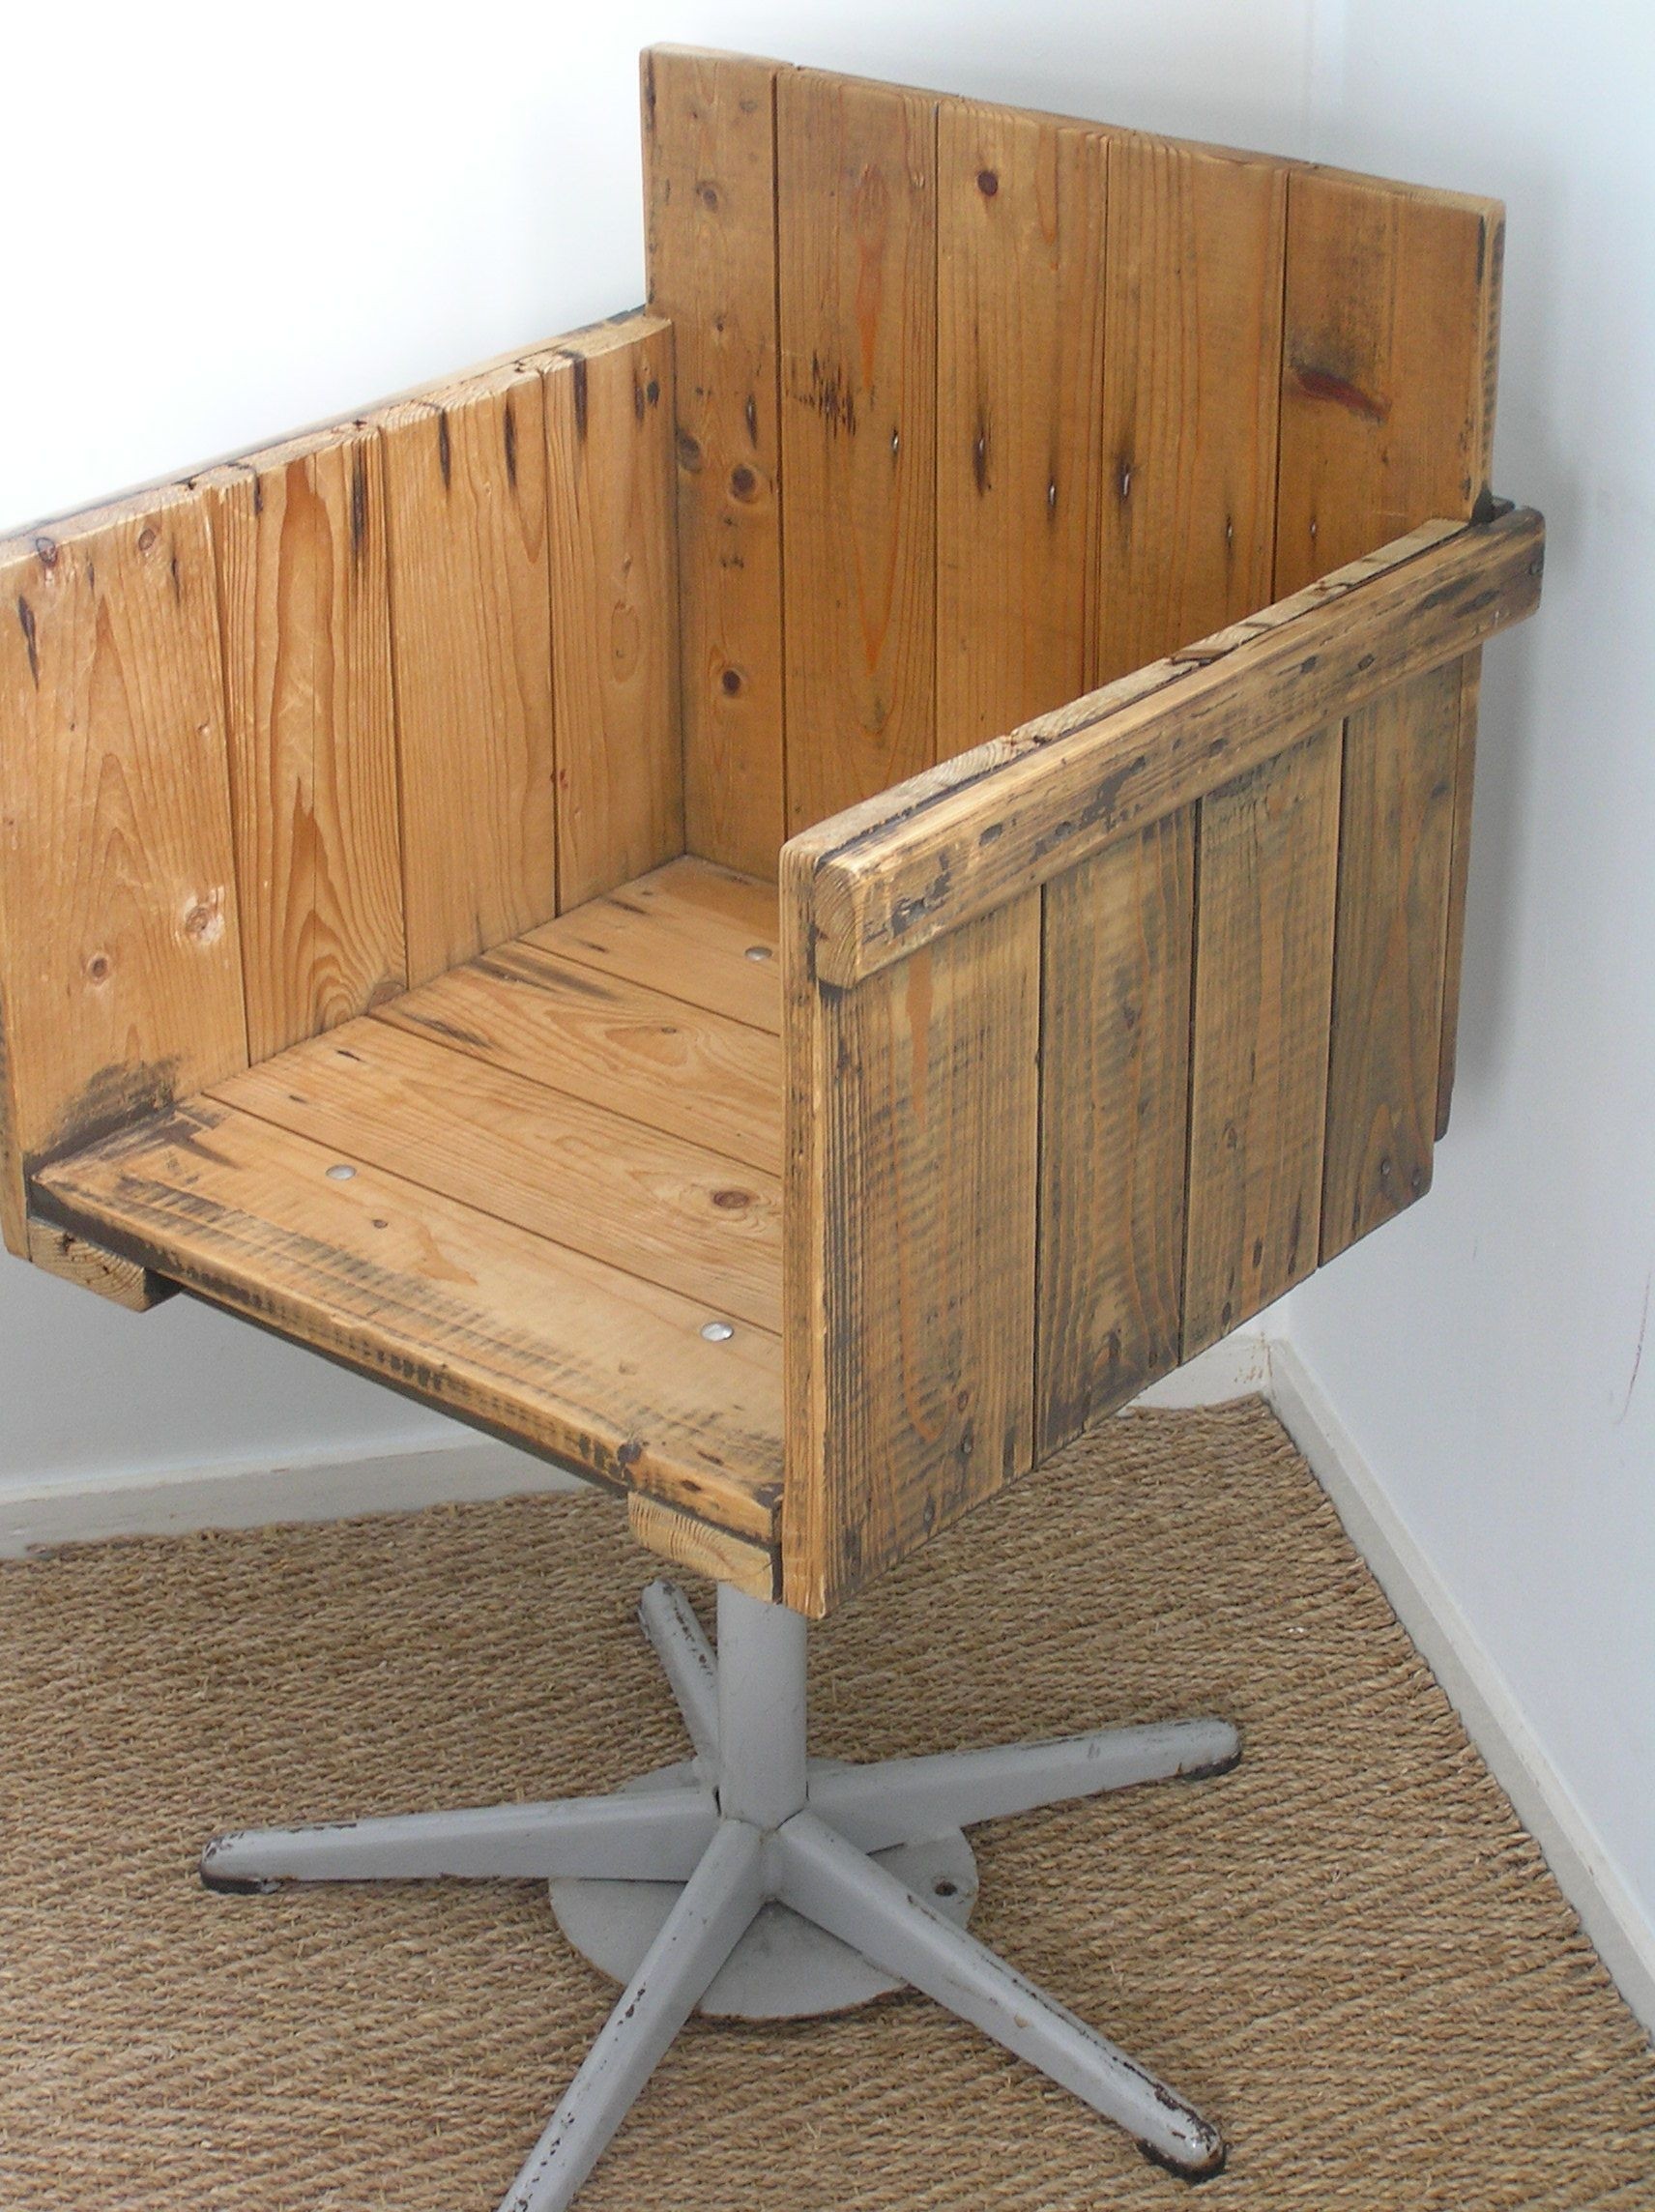 Vintage wooden office chair